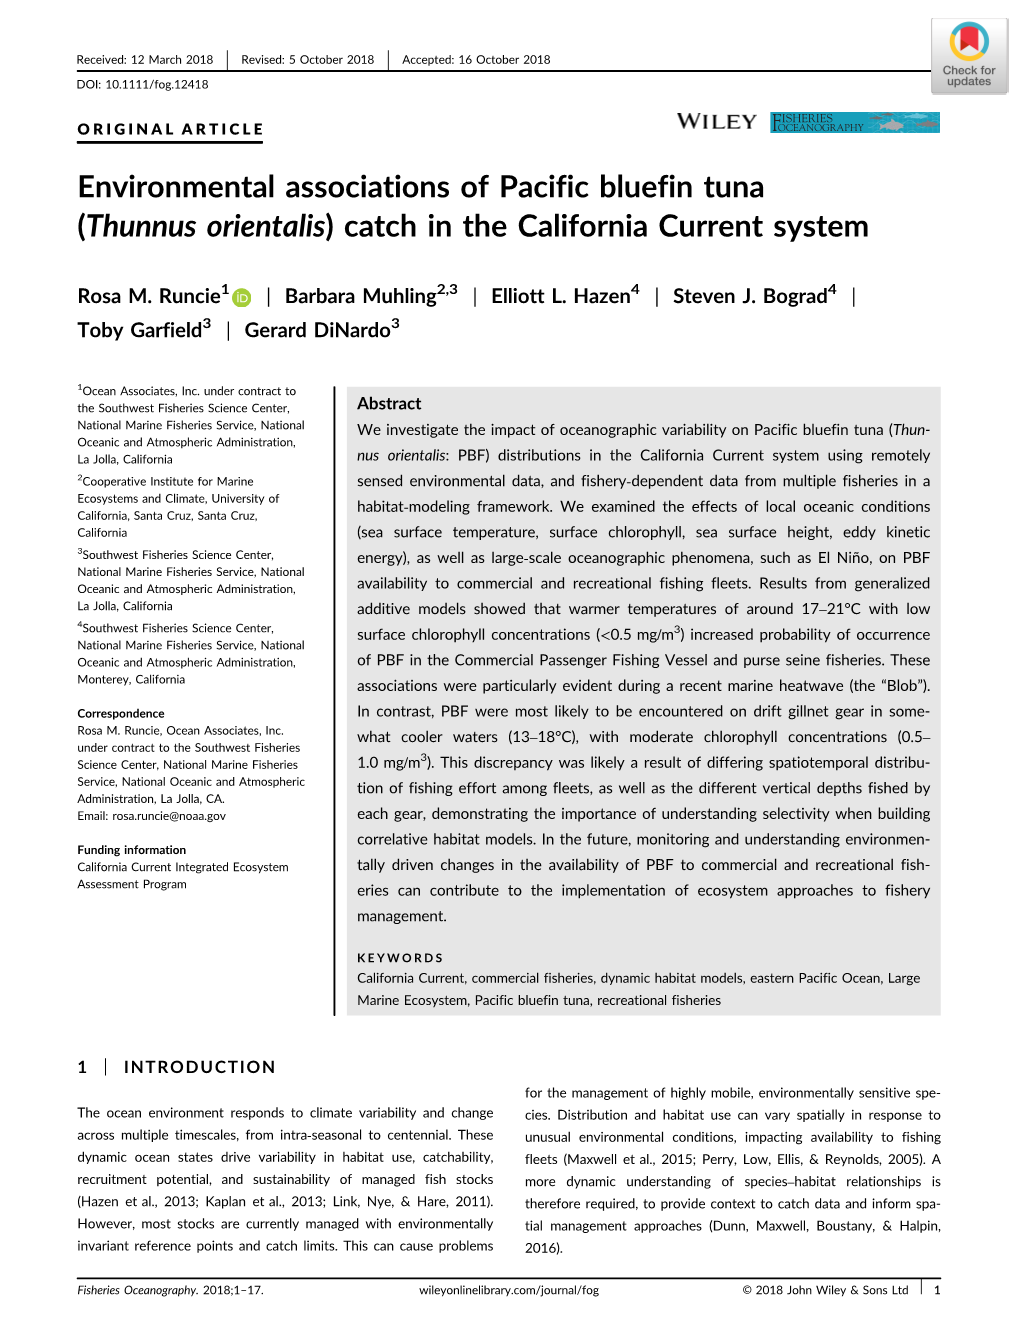 Environmental Associations of Pacific Bluefin Tuna (Thunnus Orientalis) Catch in the California Current System